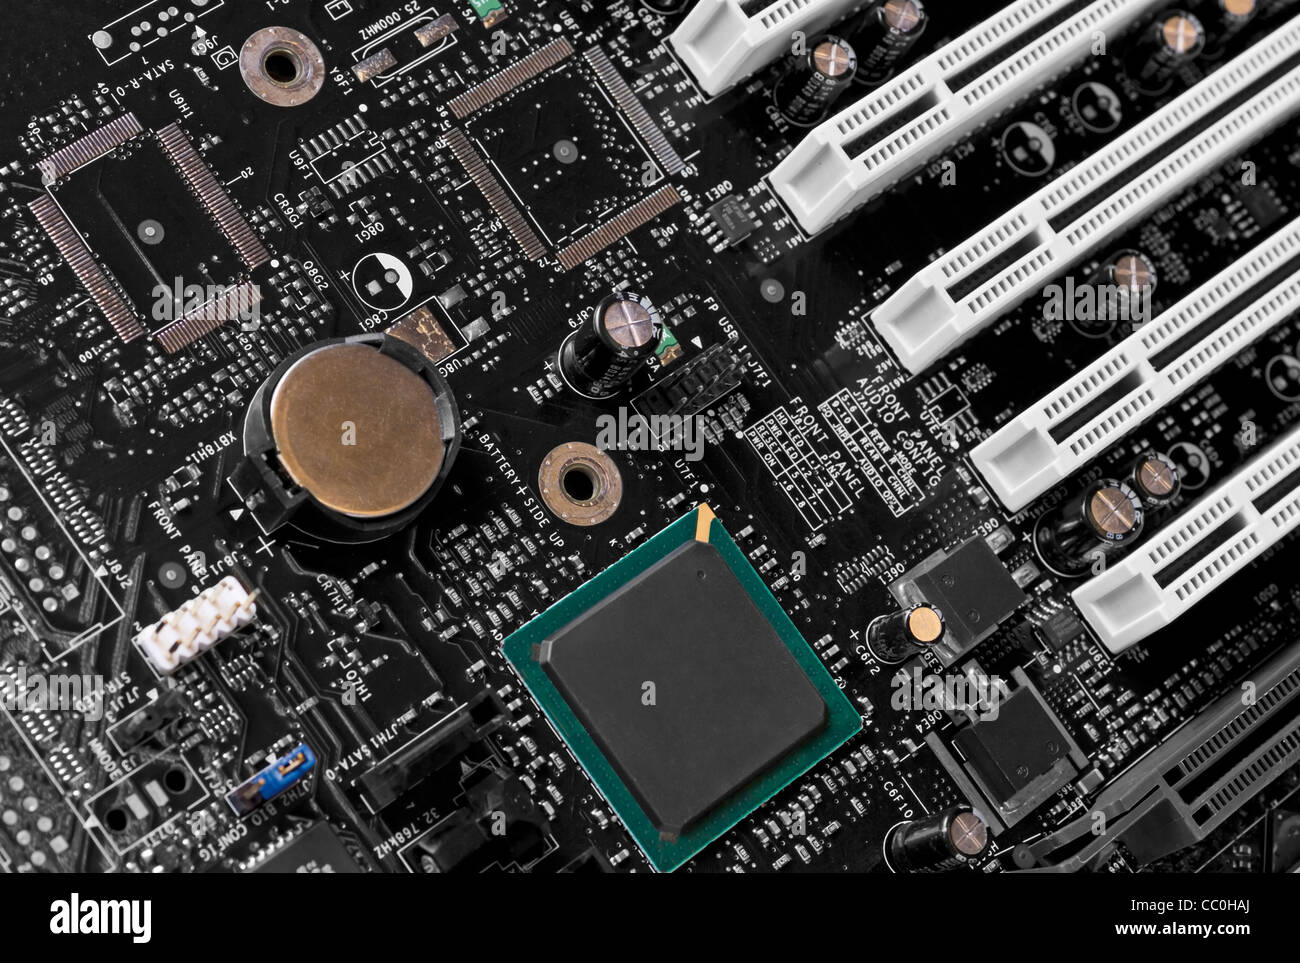 full-frame technology background showing a main board detail Stock Photo